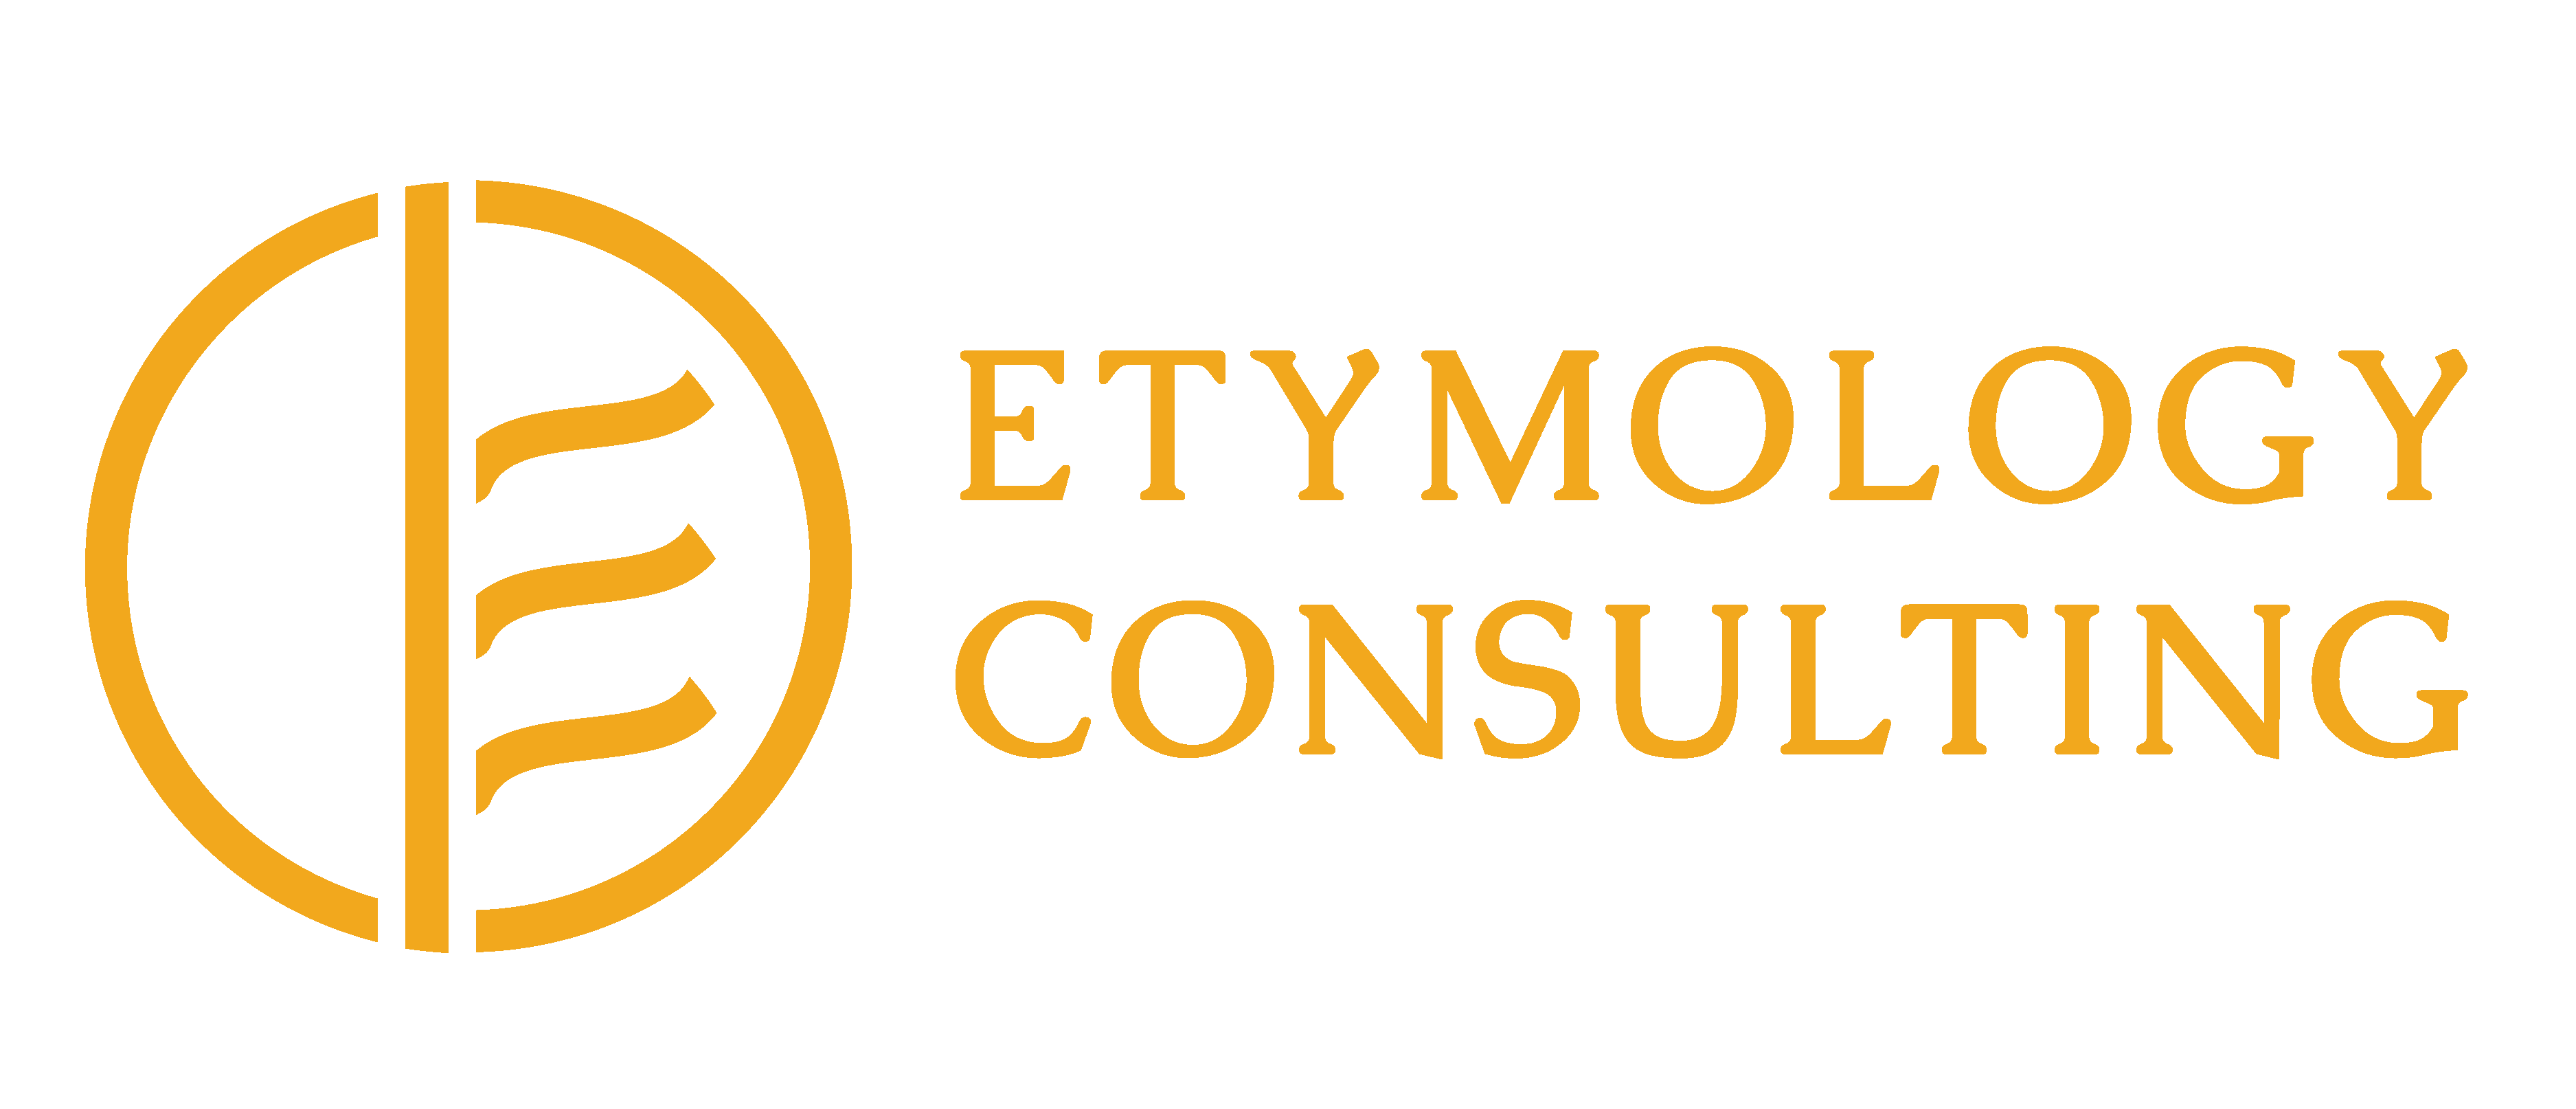 Etymology Consulting